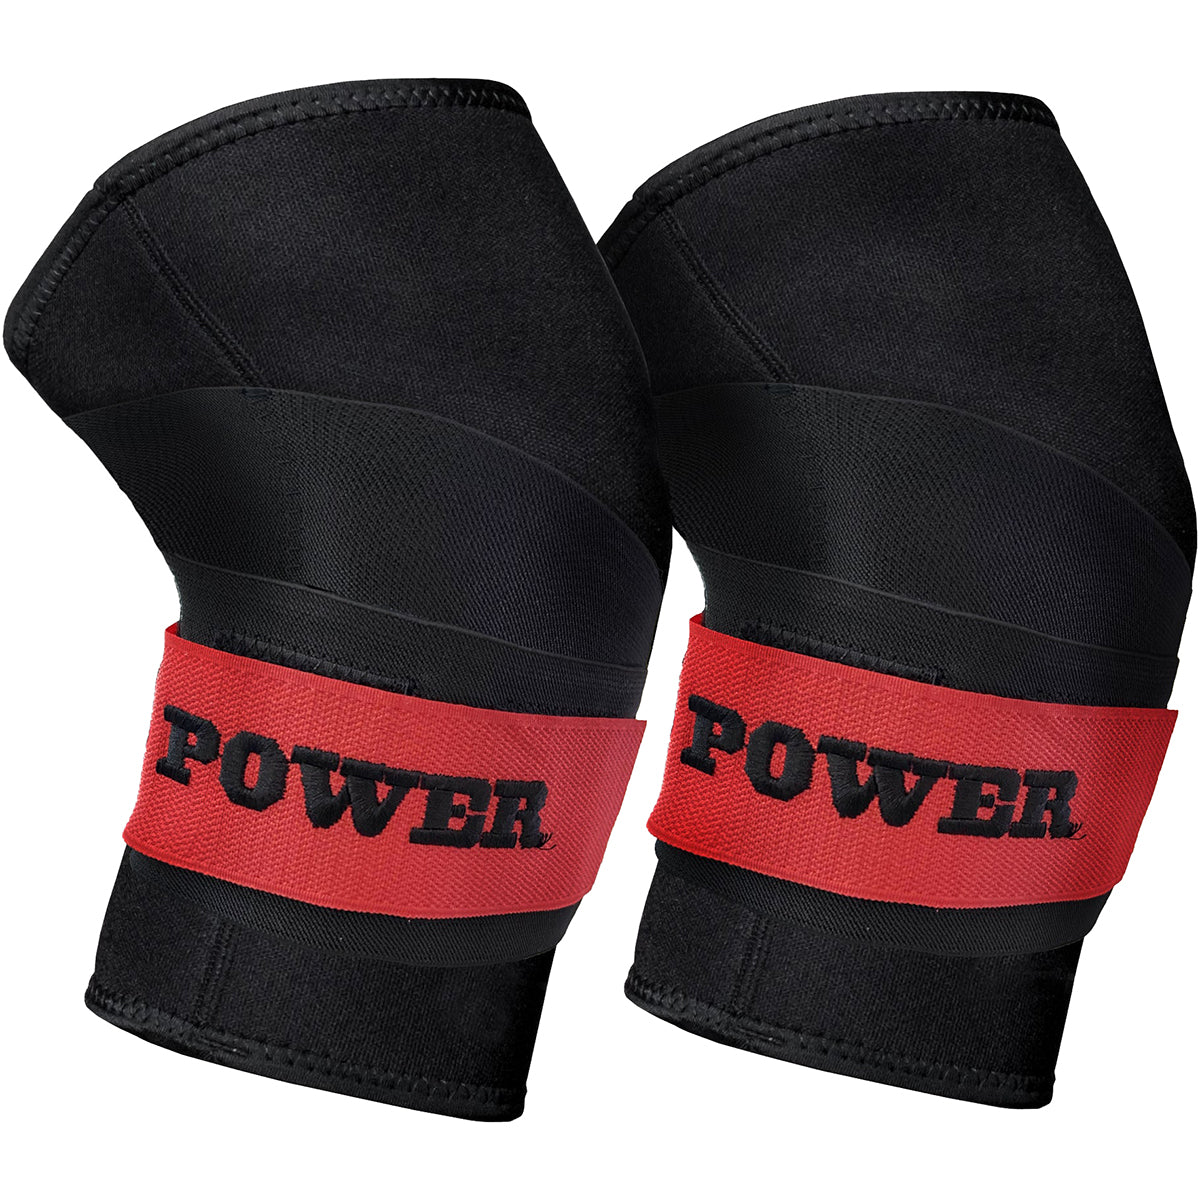 Sling Shot Max Power Knee Sleeves by Mark Bell - 4.5mm thick supports Sling Shot